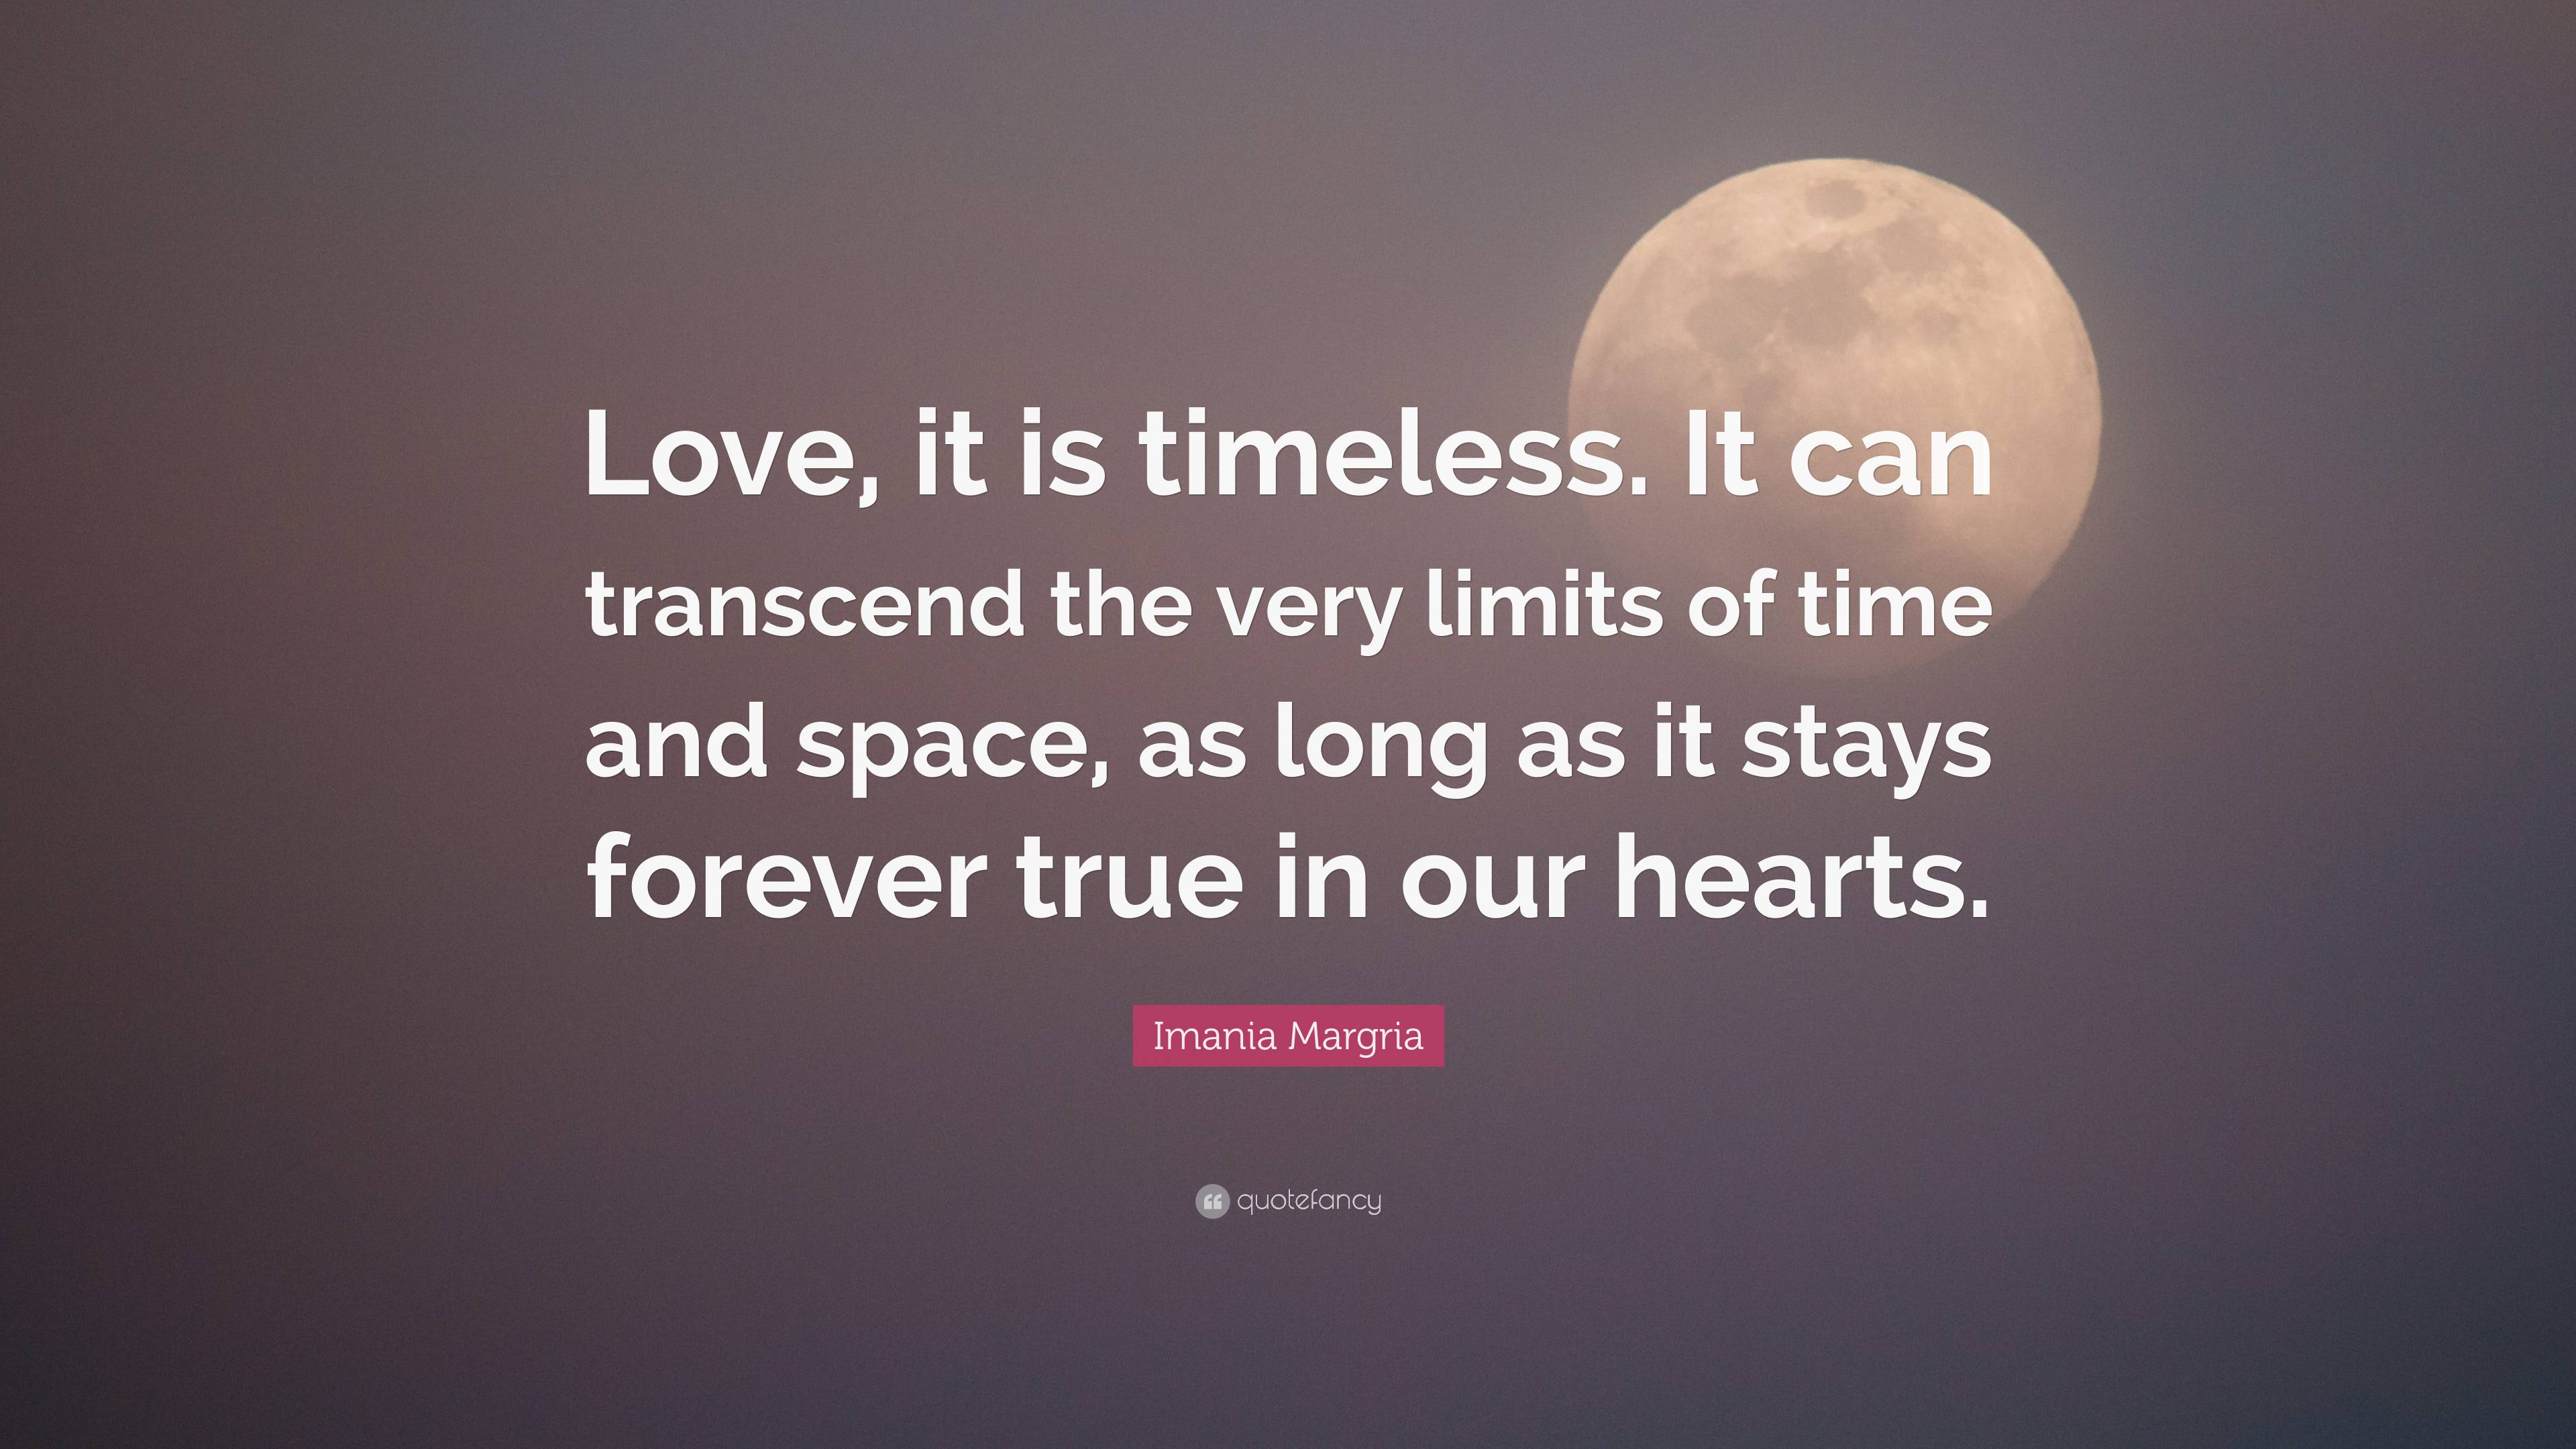 True Love Quotes - Timeless Phrases About True Love